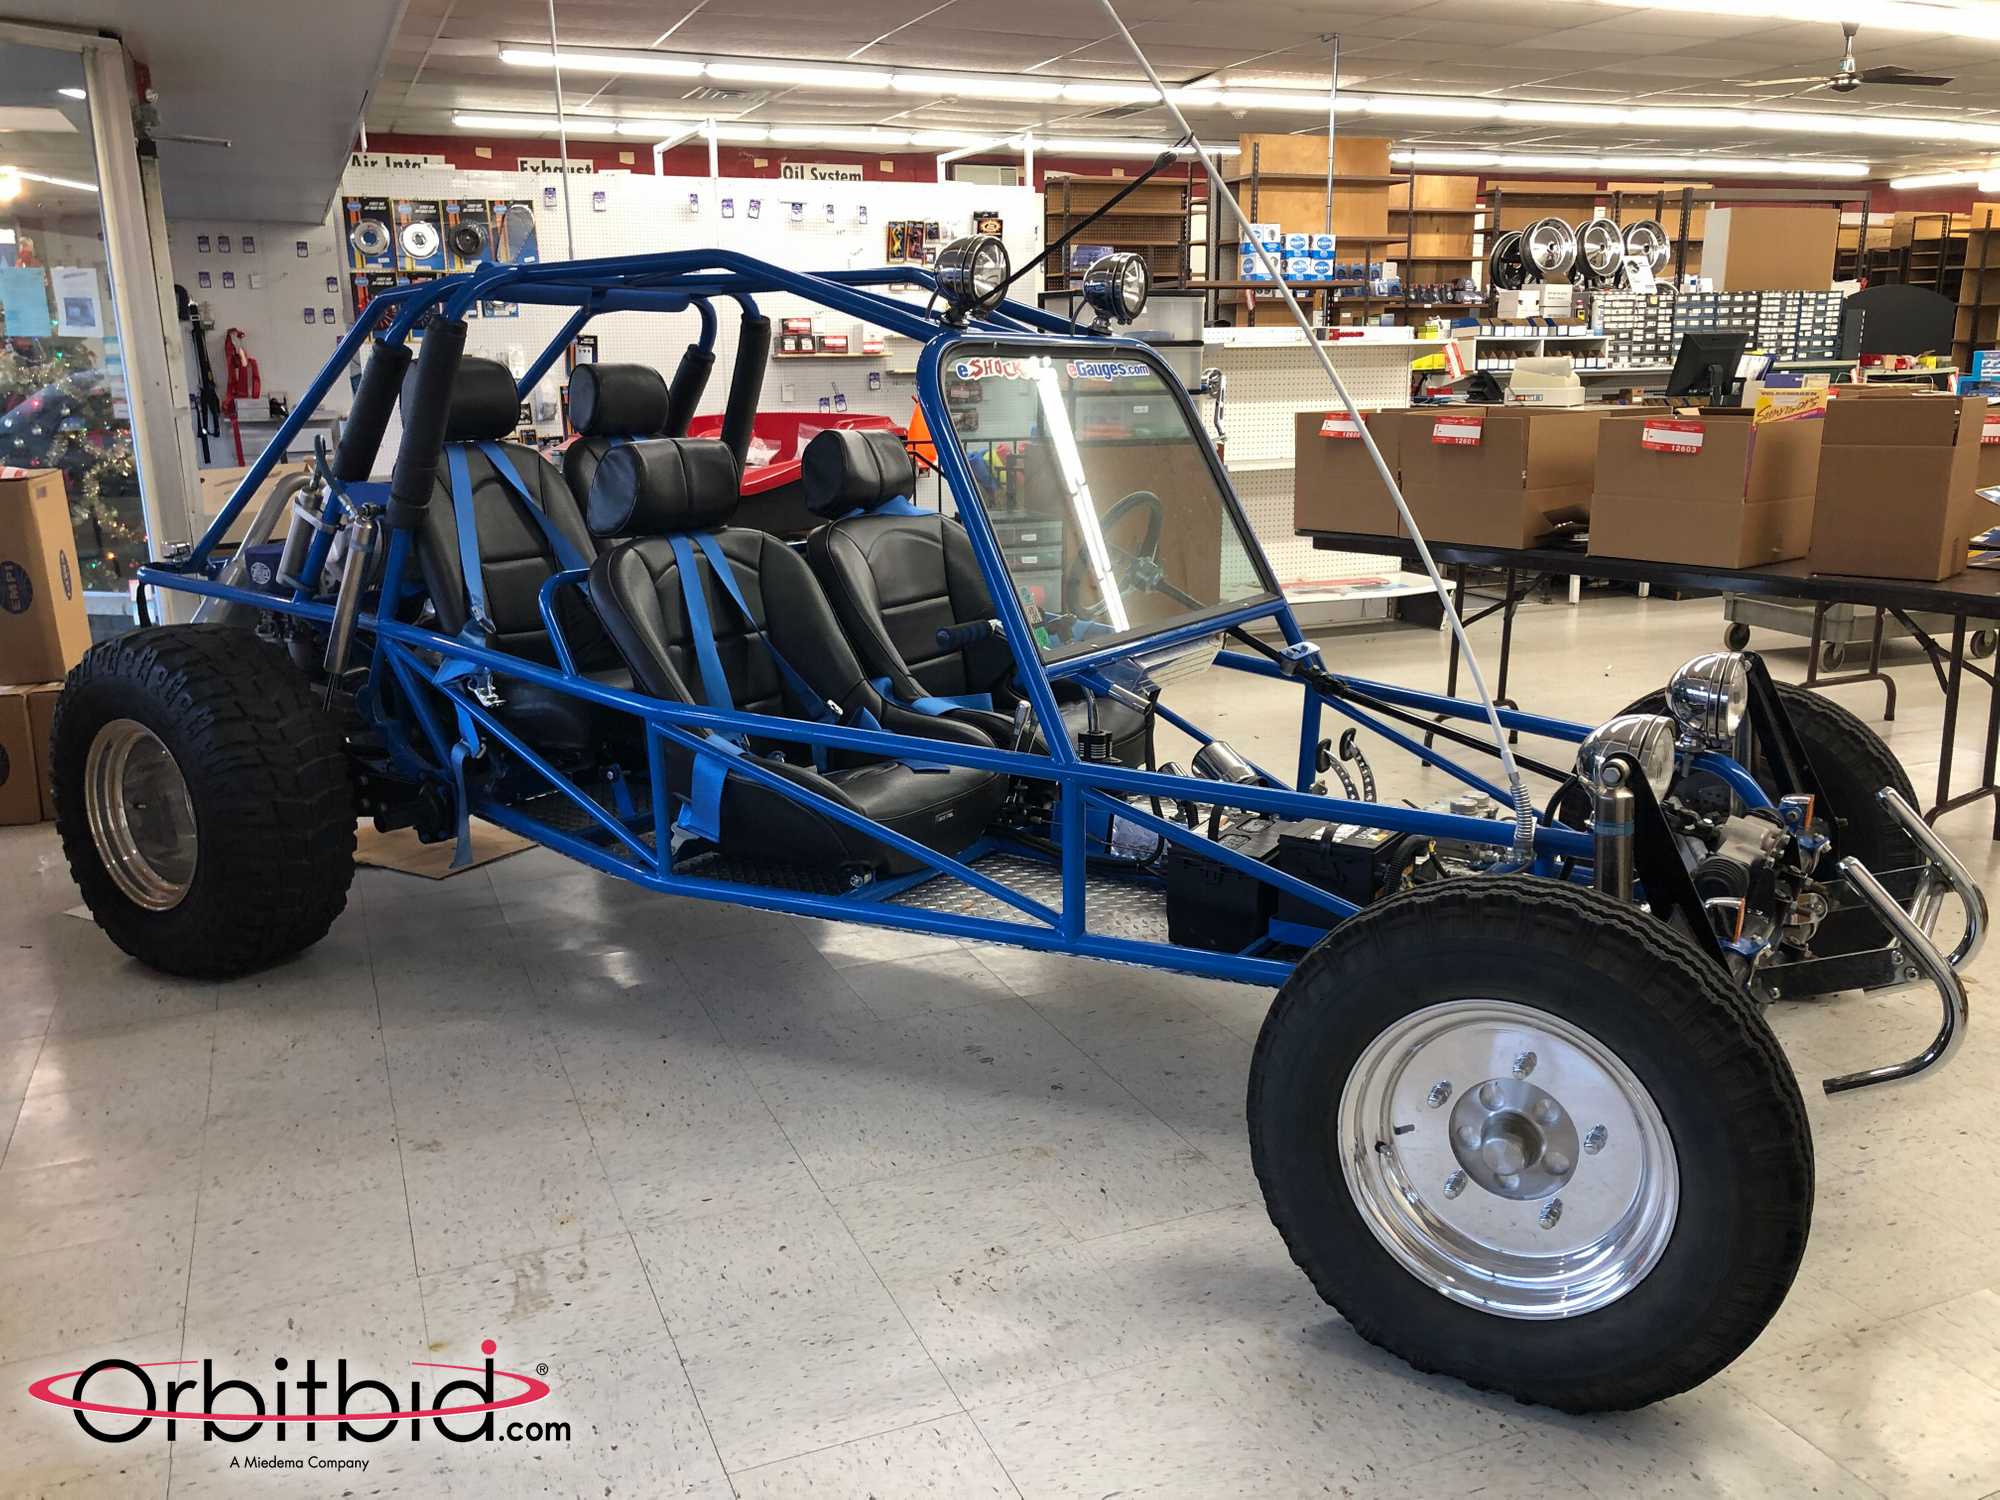 dune buggy parts and accessories